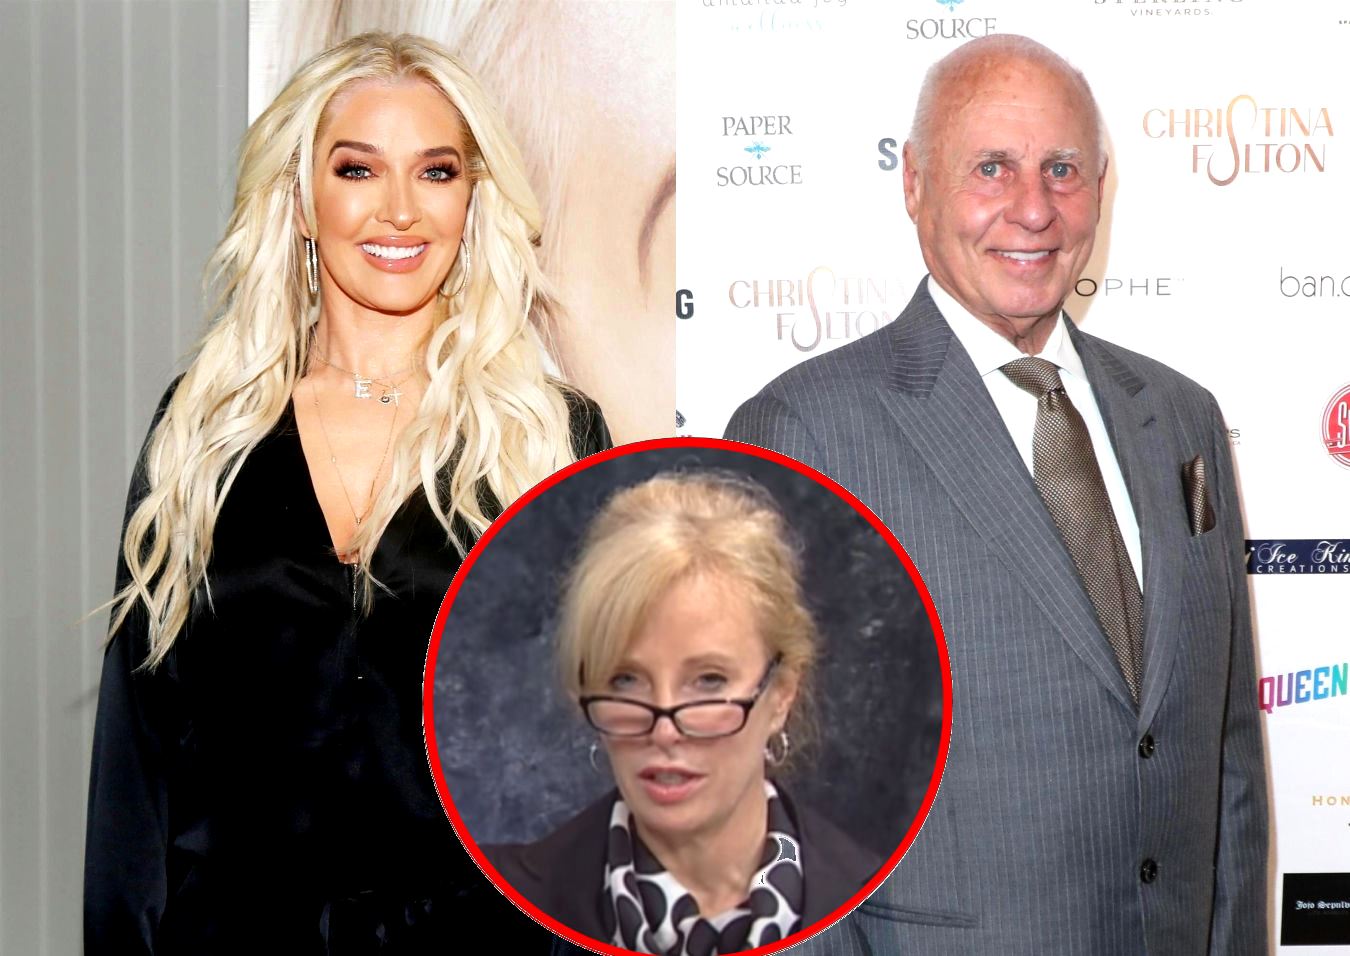 RHOBH Star Erika Jayne Accused of Criminal Conduct and "Harassment" After Exposing Husband Thomas Girardi's Relationship With Justice Tricia A. Bigelow, Get Details on the Judge as Her Attorney Confirms They Dated